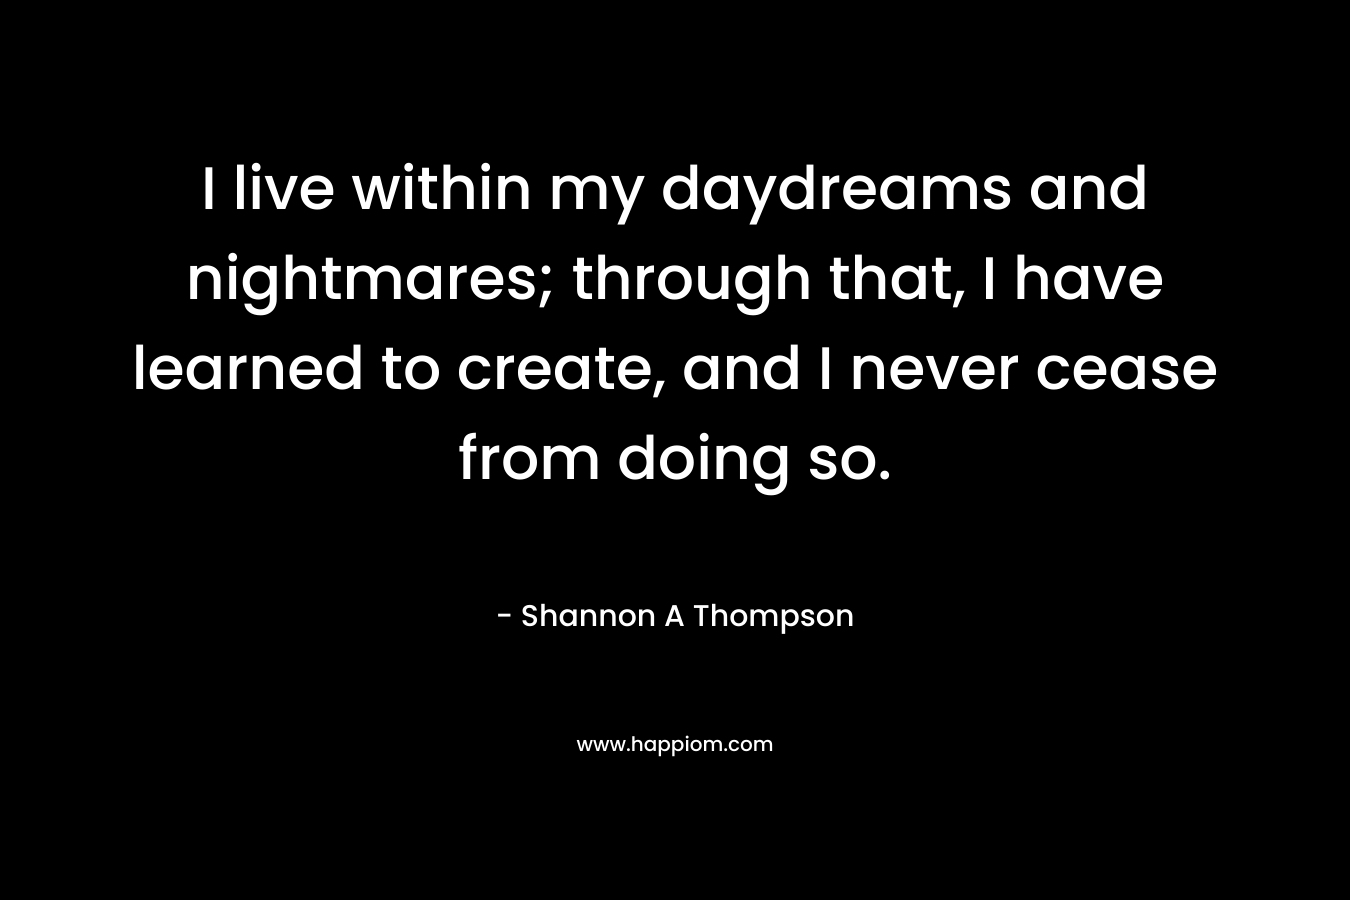 I live within my daydreams and nightmares; through that, I have learned to create, and I never cease from doing so. – Shannon A Thompson